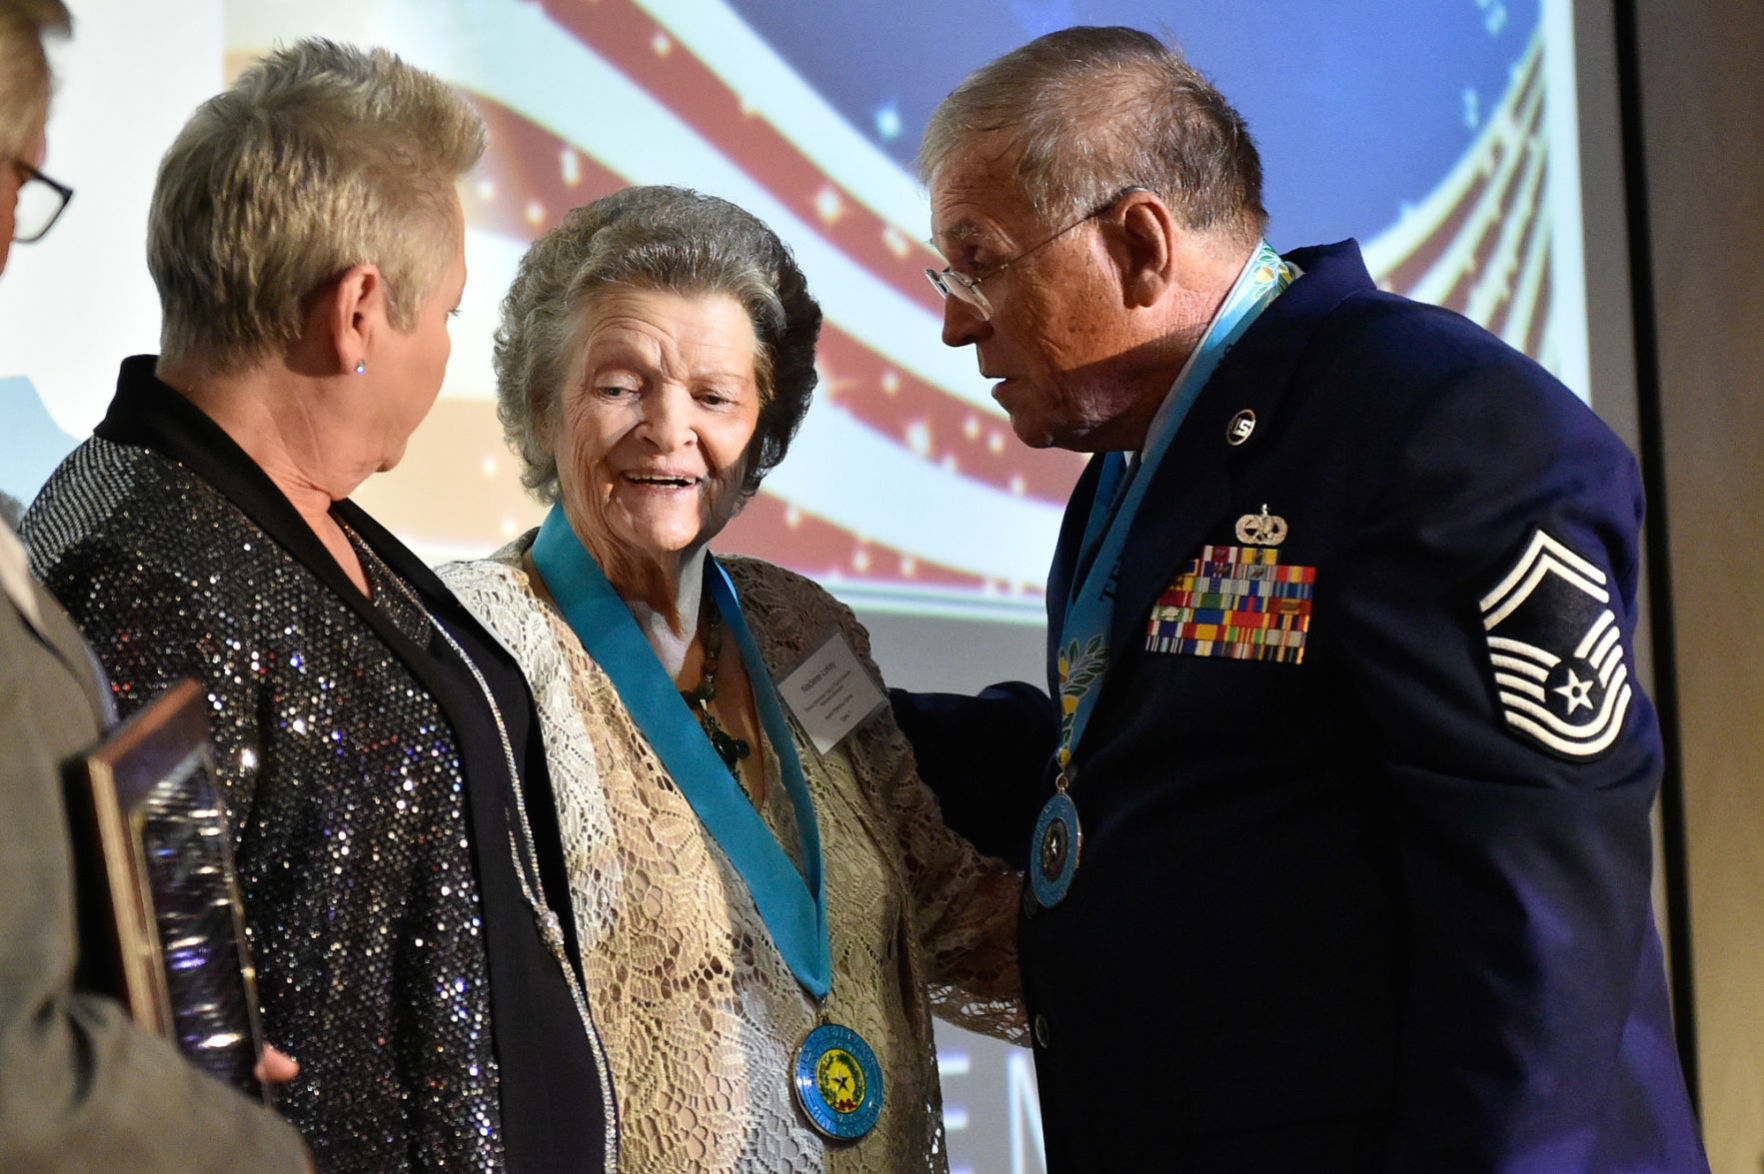 do medal of honor recipients get paid for life